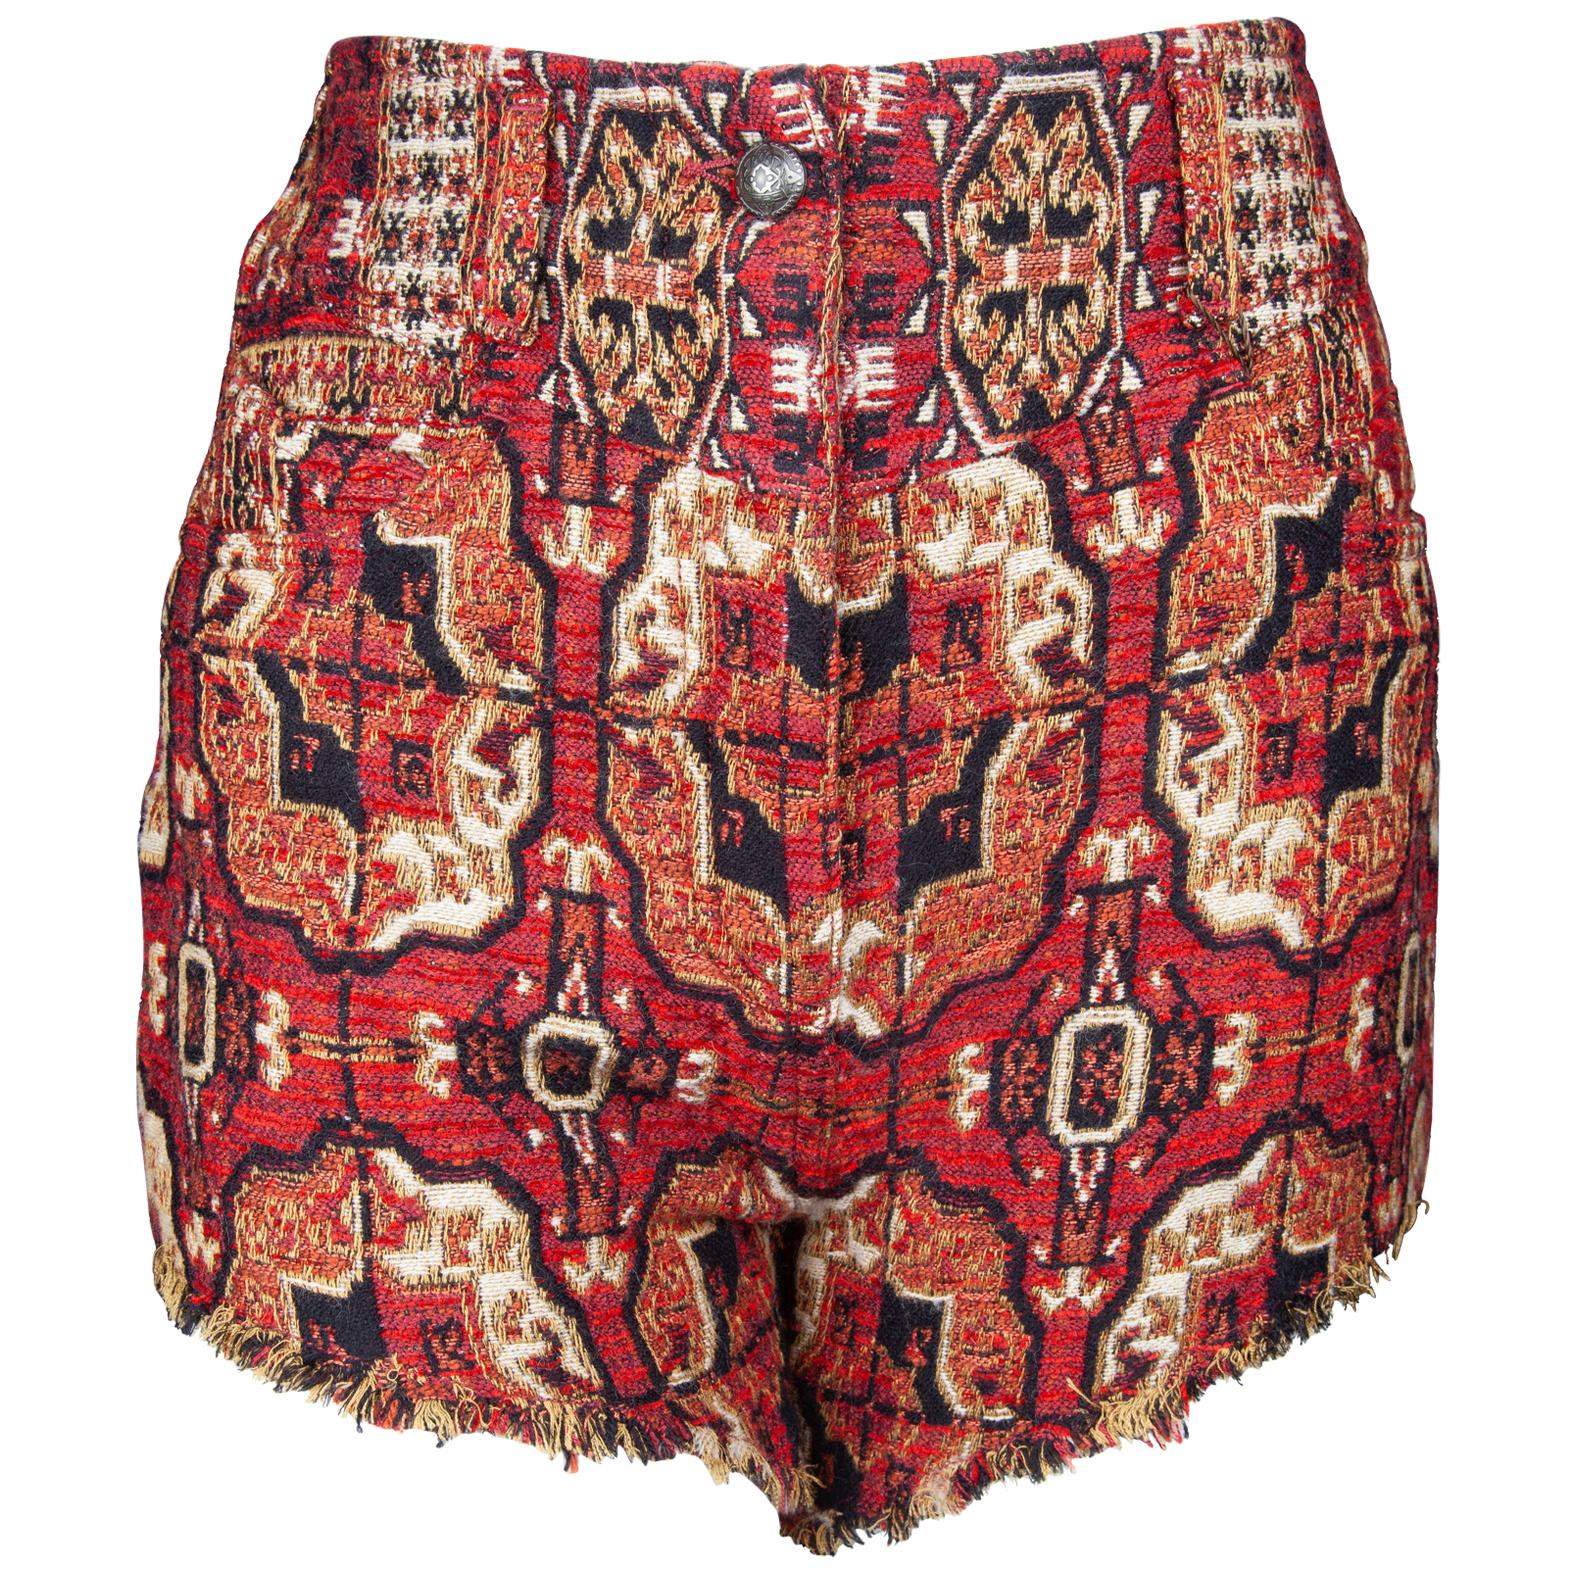 Etro Runway Red and Black Woven Jacquard Dress Shorts Size 26